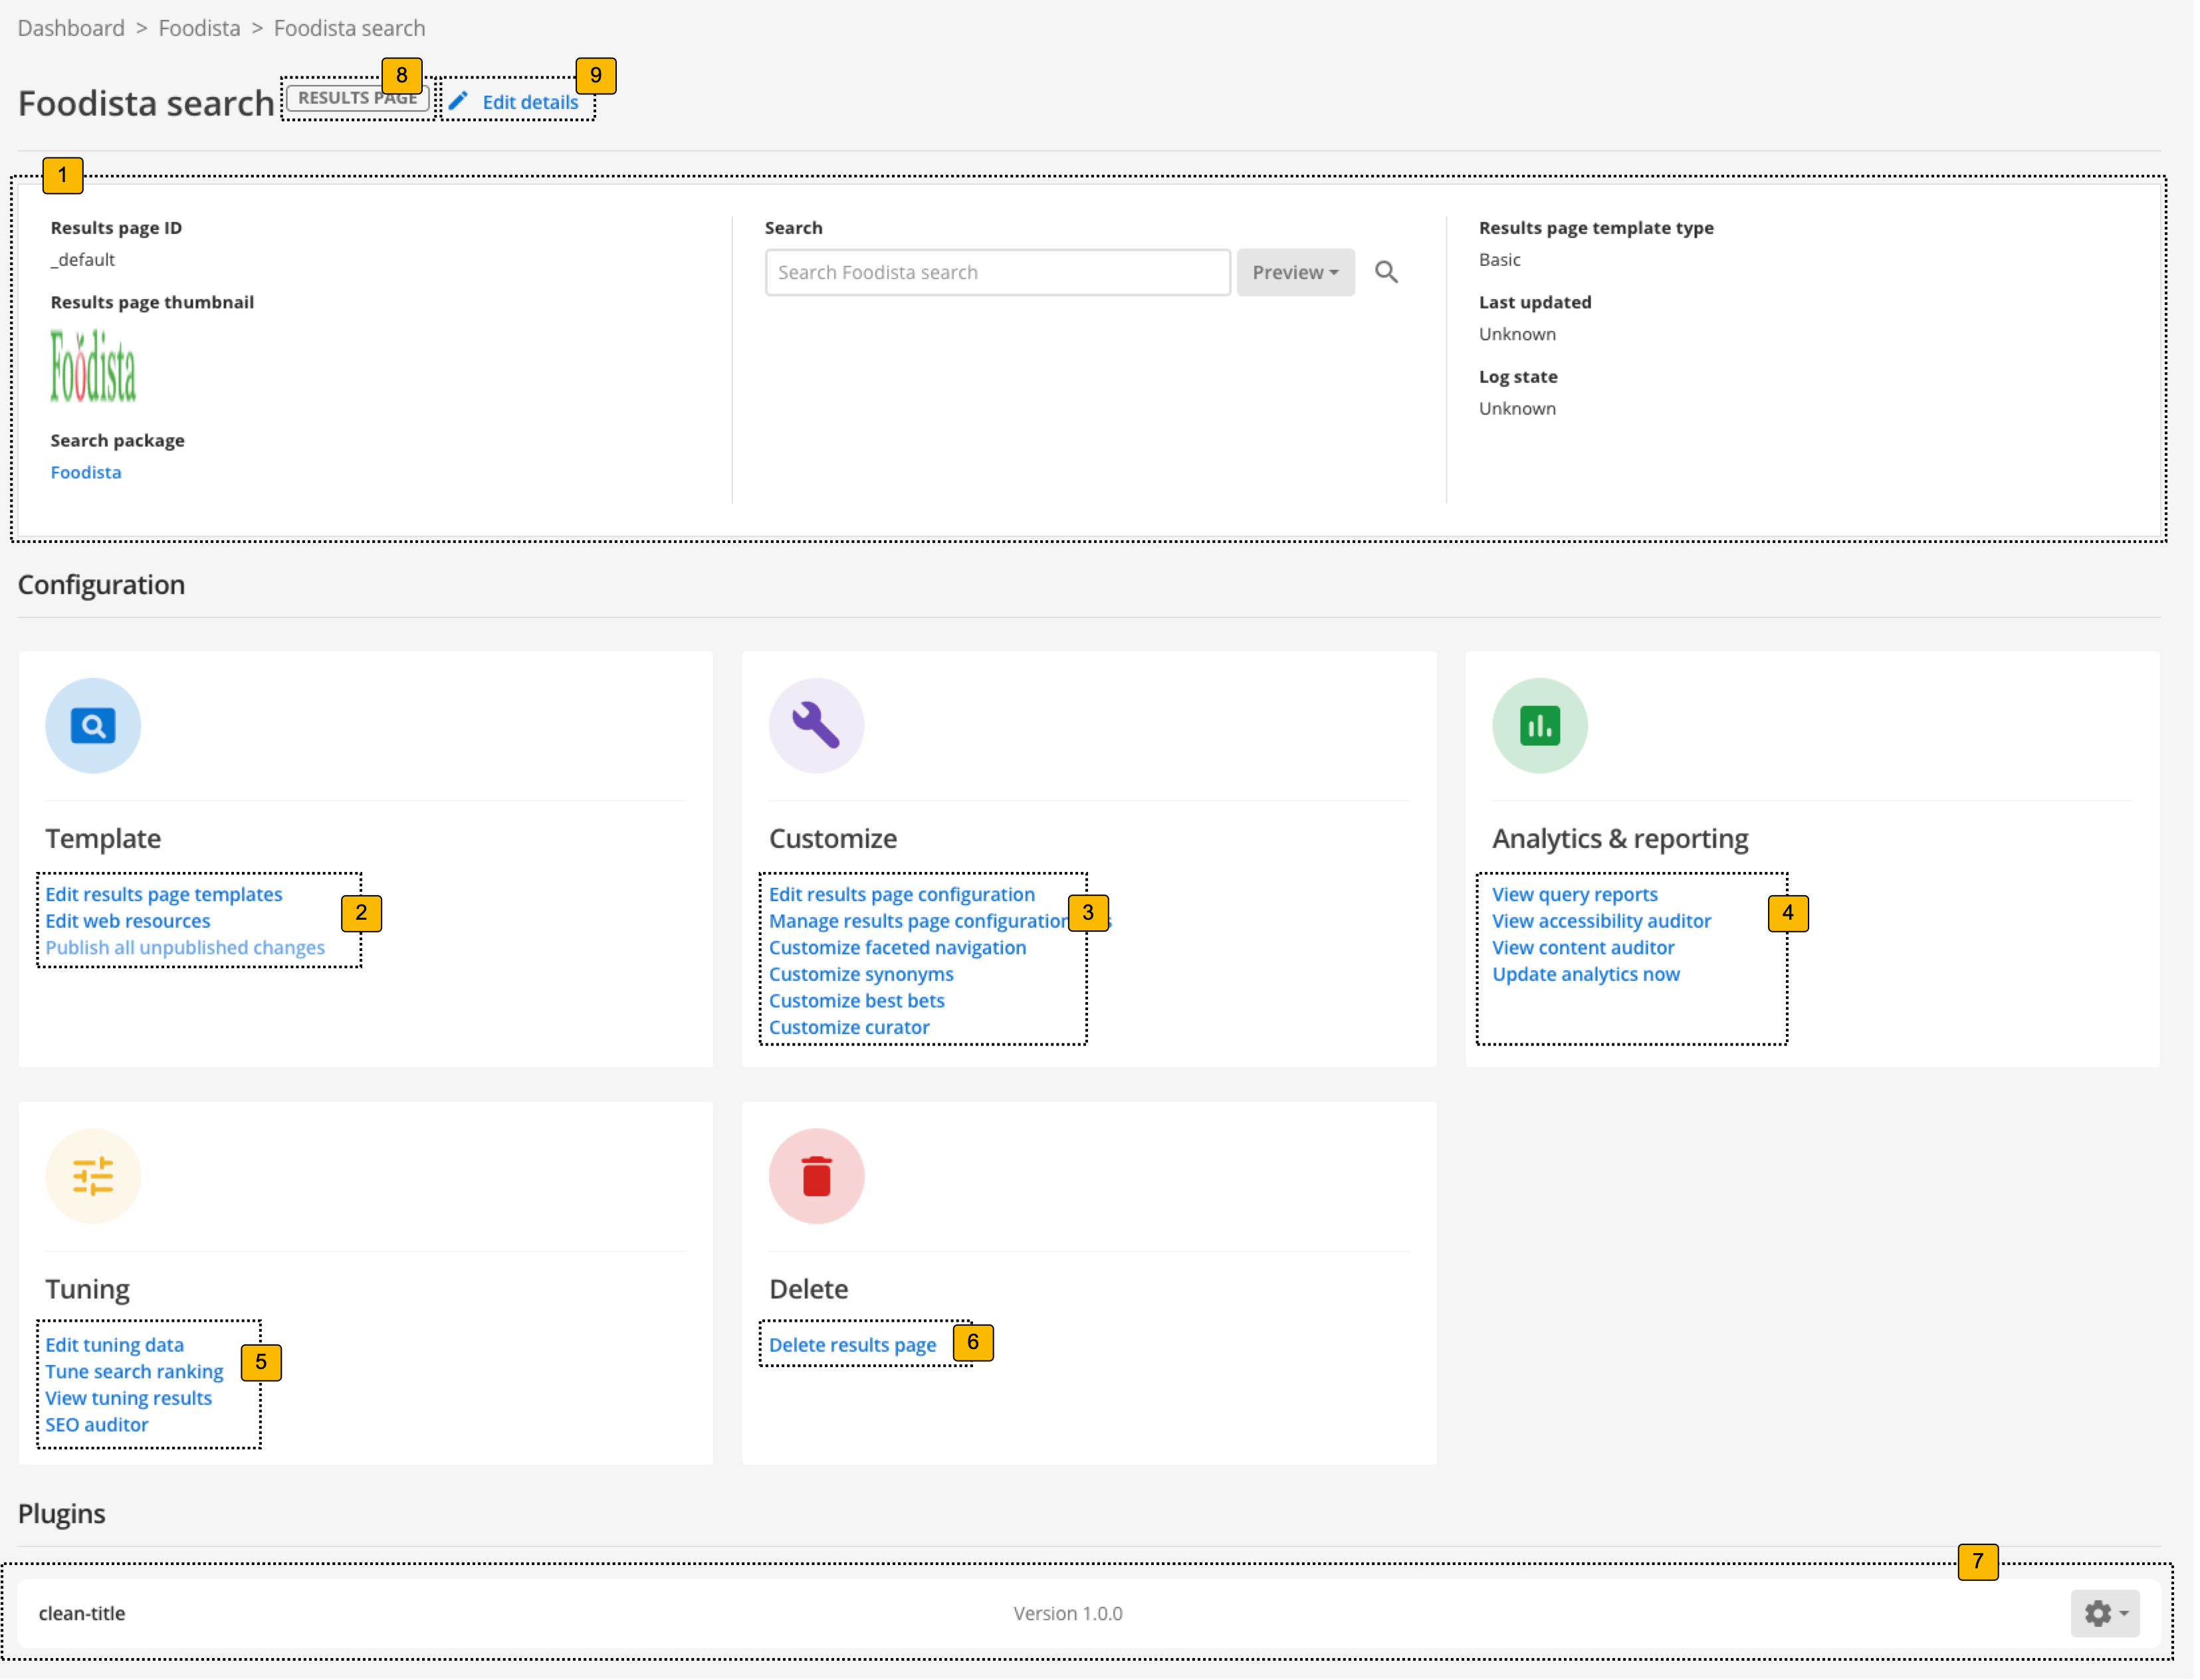 manage results page